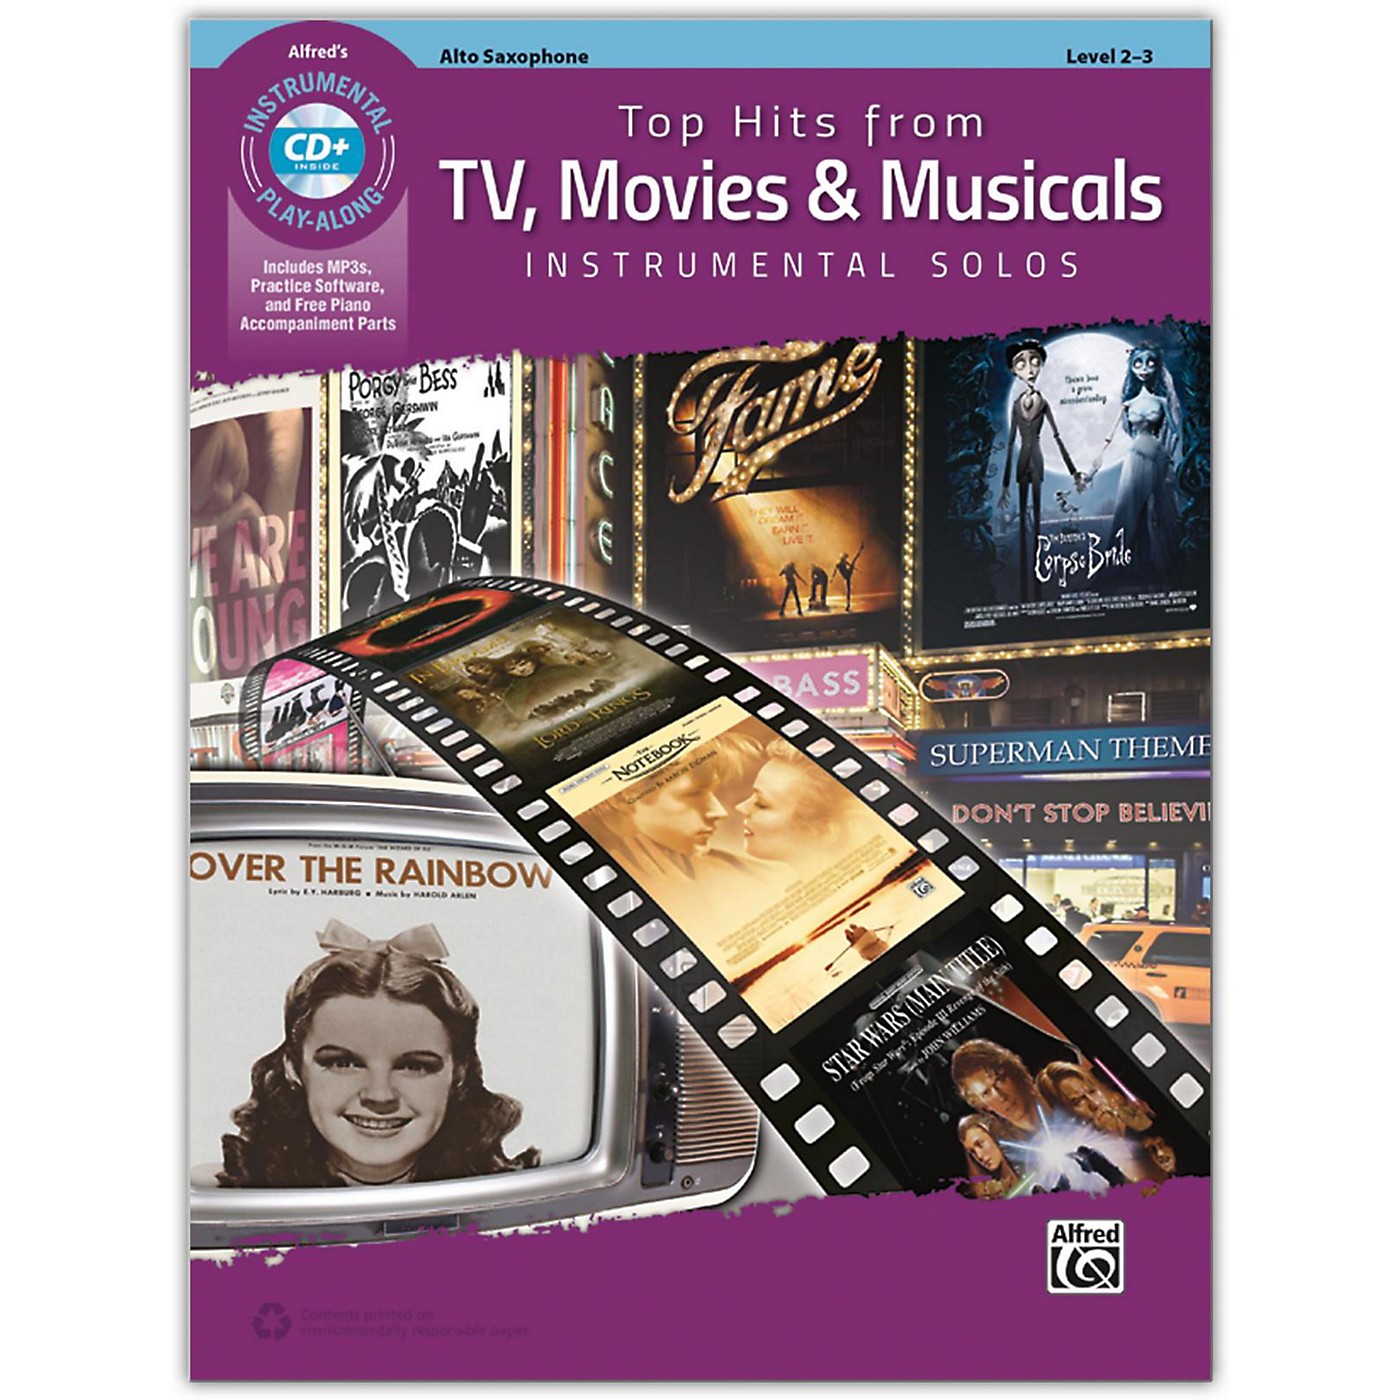 Alfred Top Hits from TV, Movies & Musicals Instrumental Solos Alto Saxophone Book & CD, Level 2-3 thumbnail